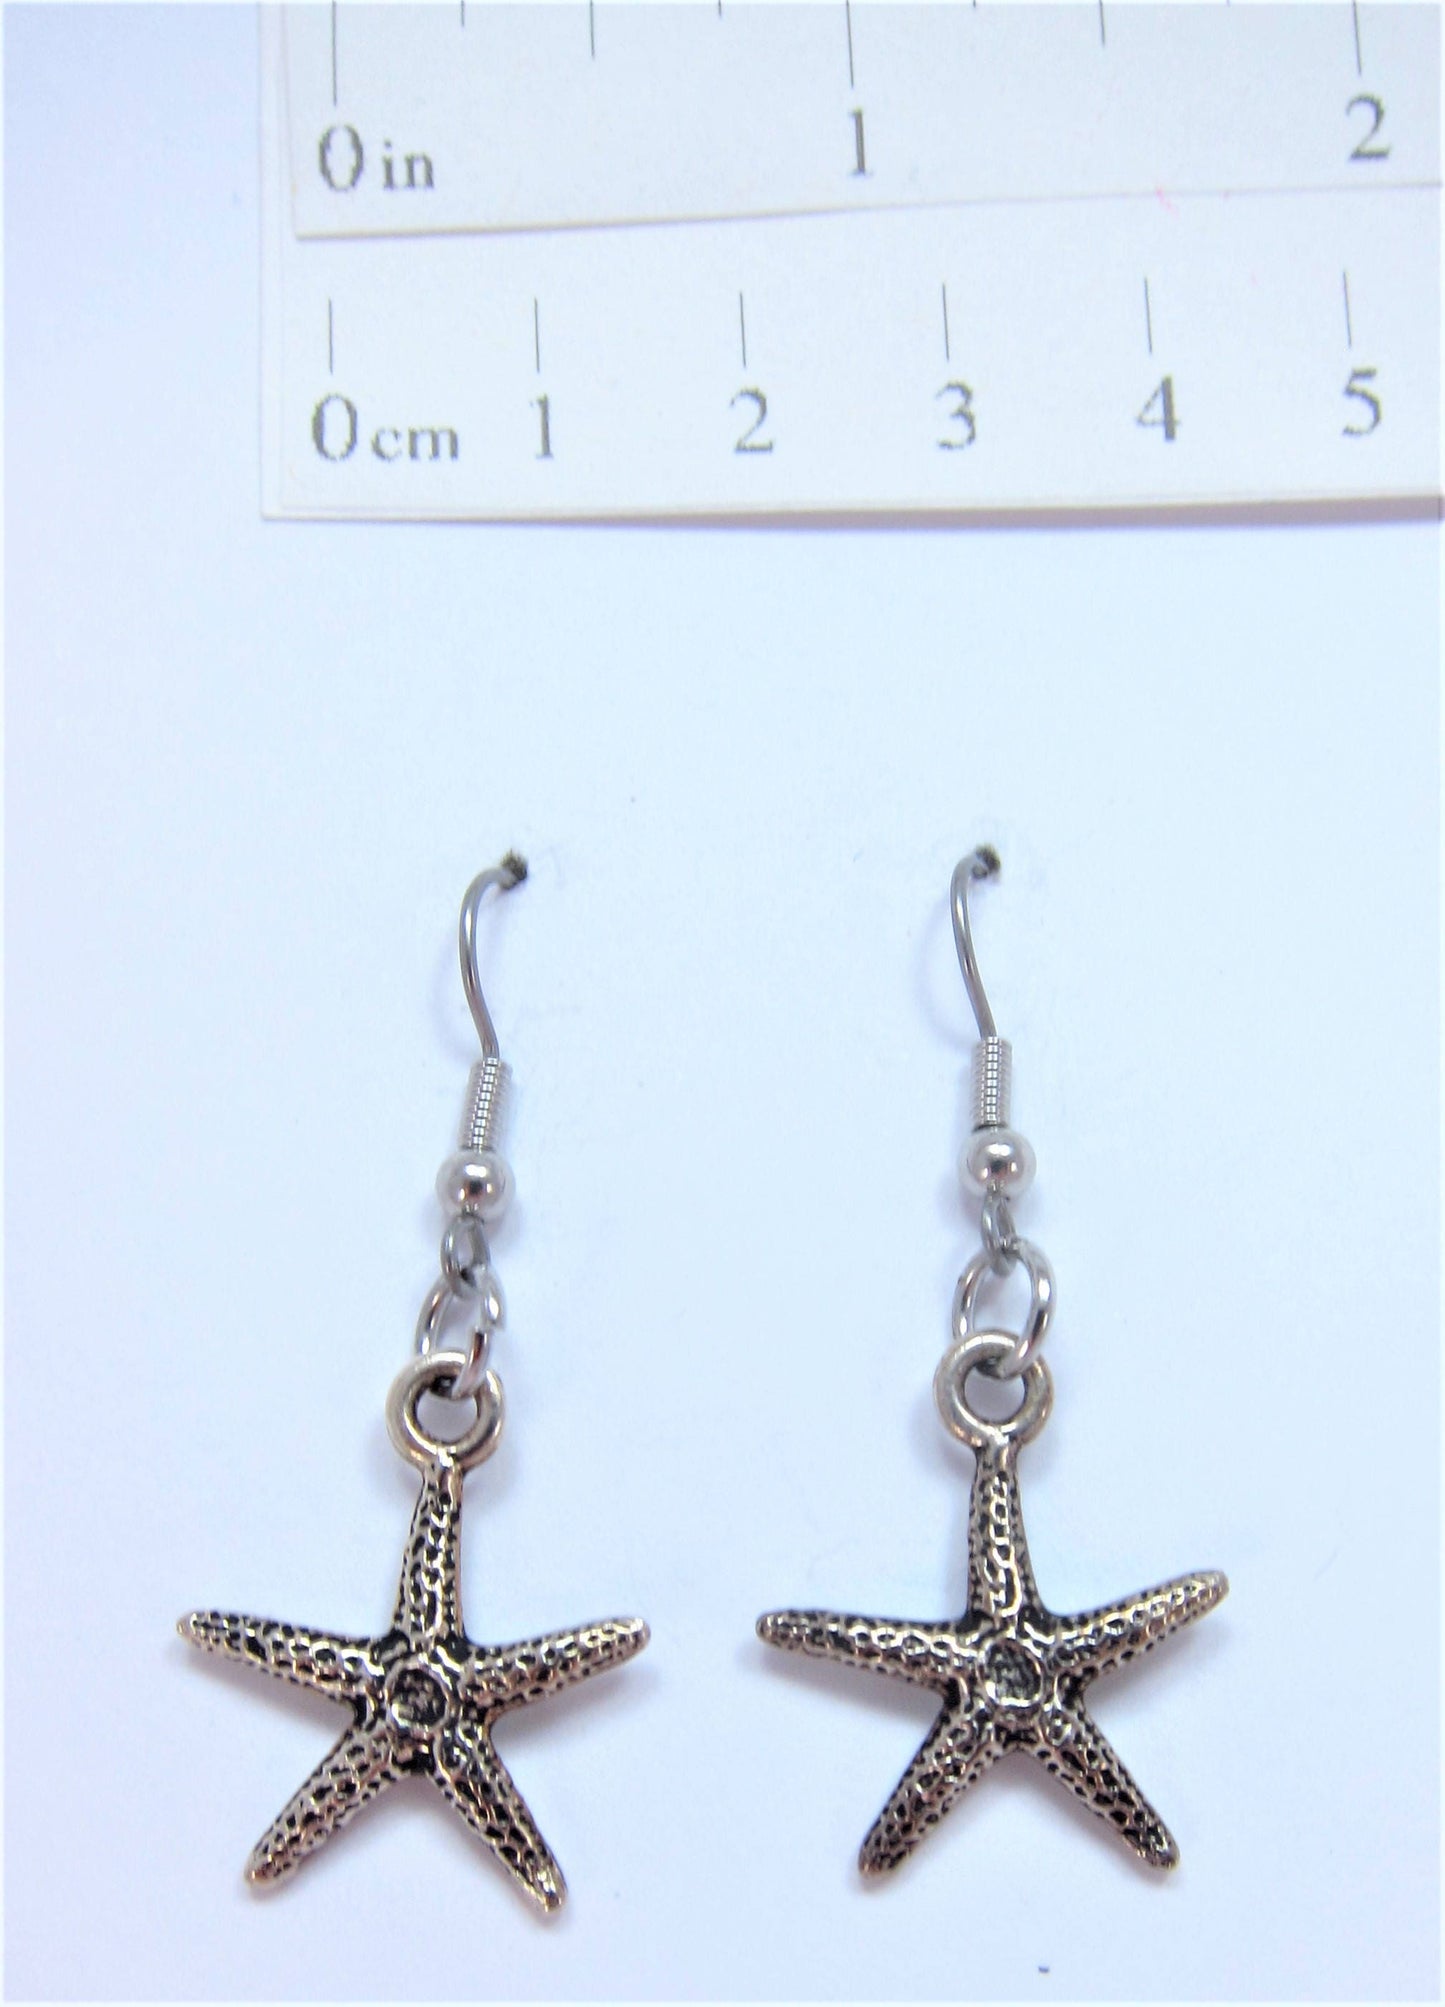 Charmed! Starfish / Sea star earrings silver plate antique finish on hypoallergenic surgical steel hooks